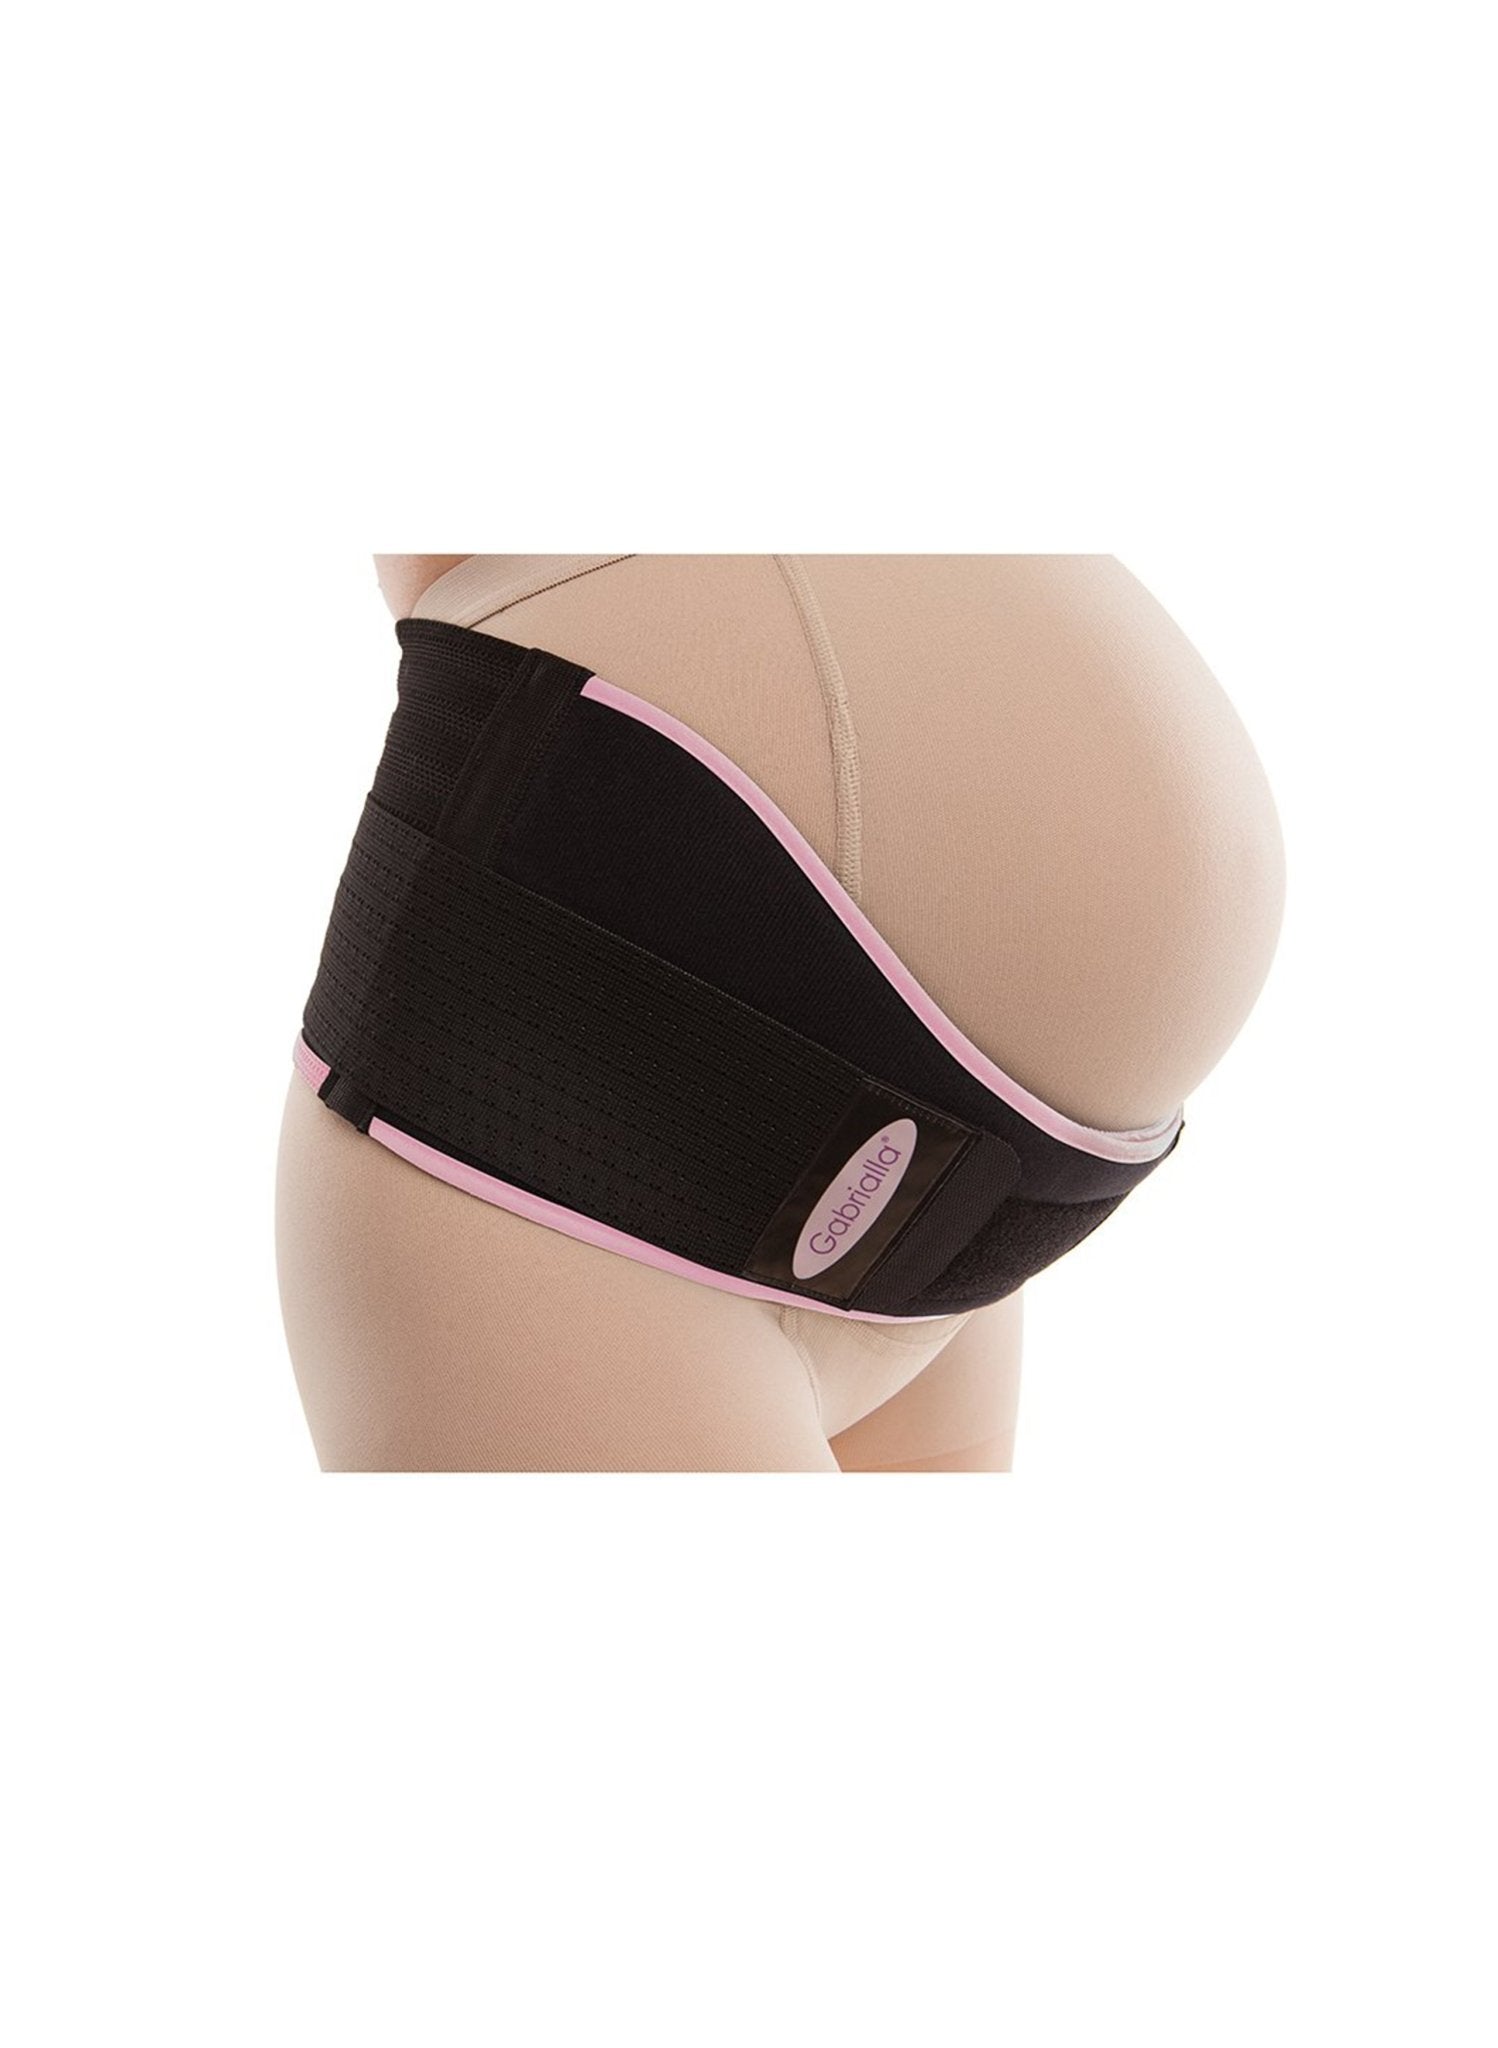 Maternity Belt - Deluxe Breathable Medium Support - Black - Mums and Bumps